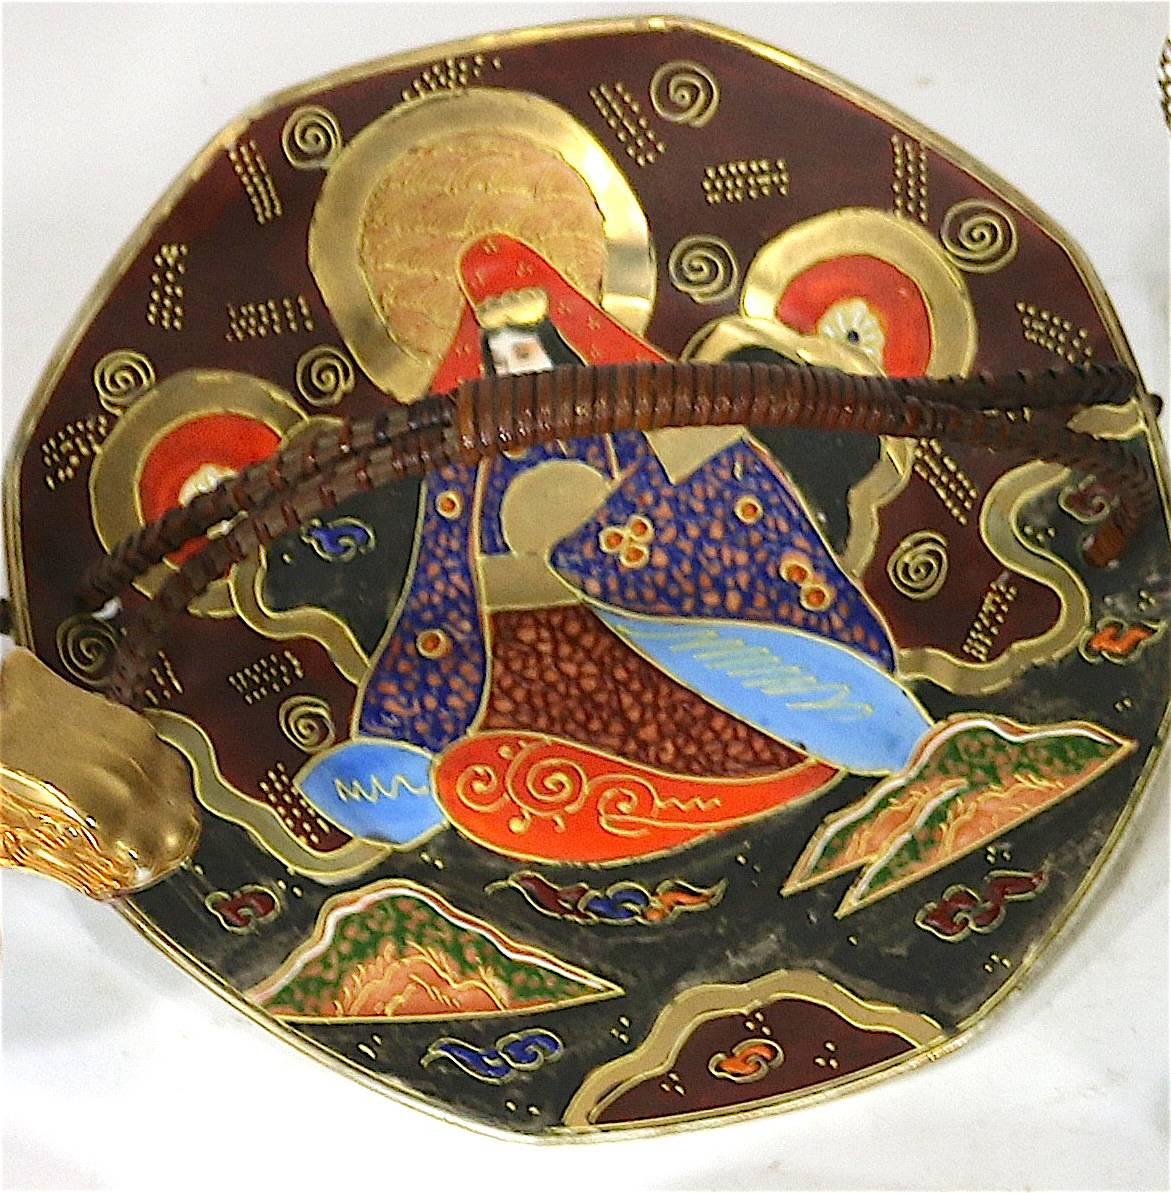 Japanese Satsuma Handled Serving Plate with Gold Relief Design In Excellent Condition For Sale In West Palm Beach, FL